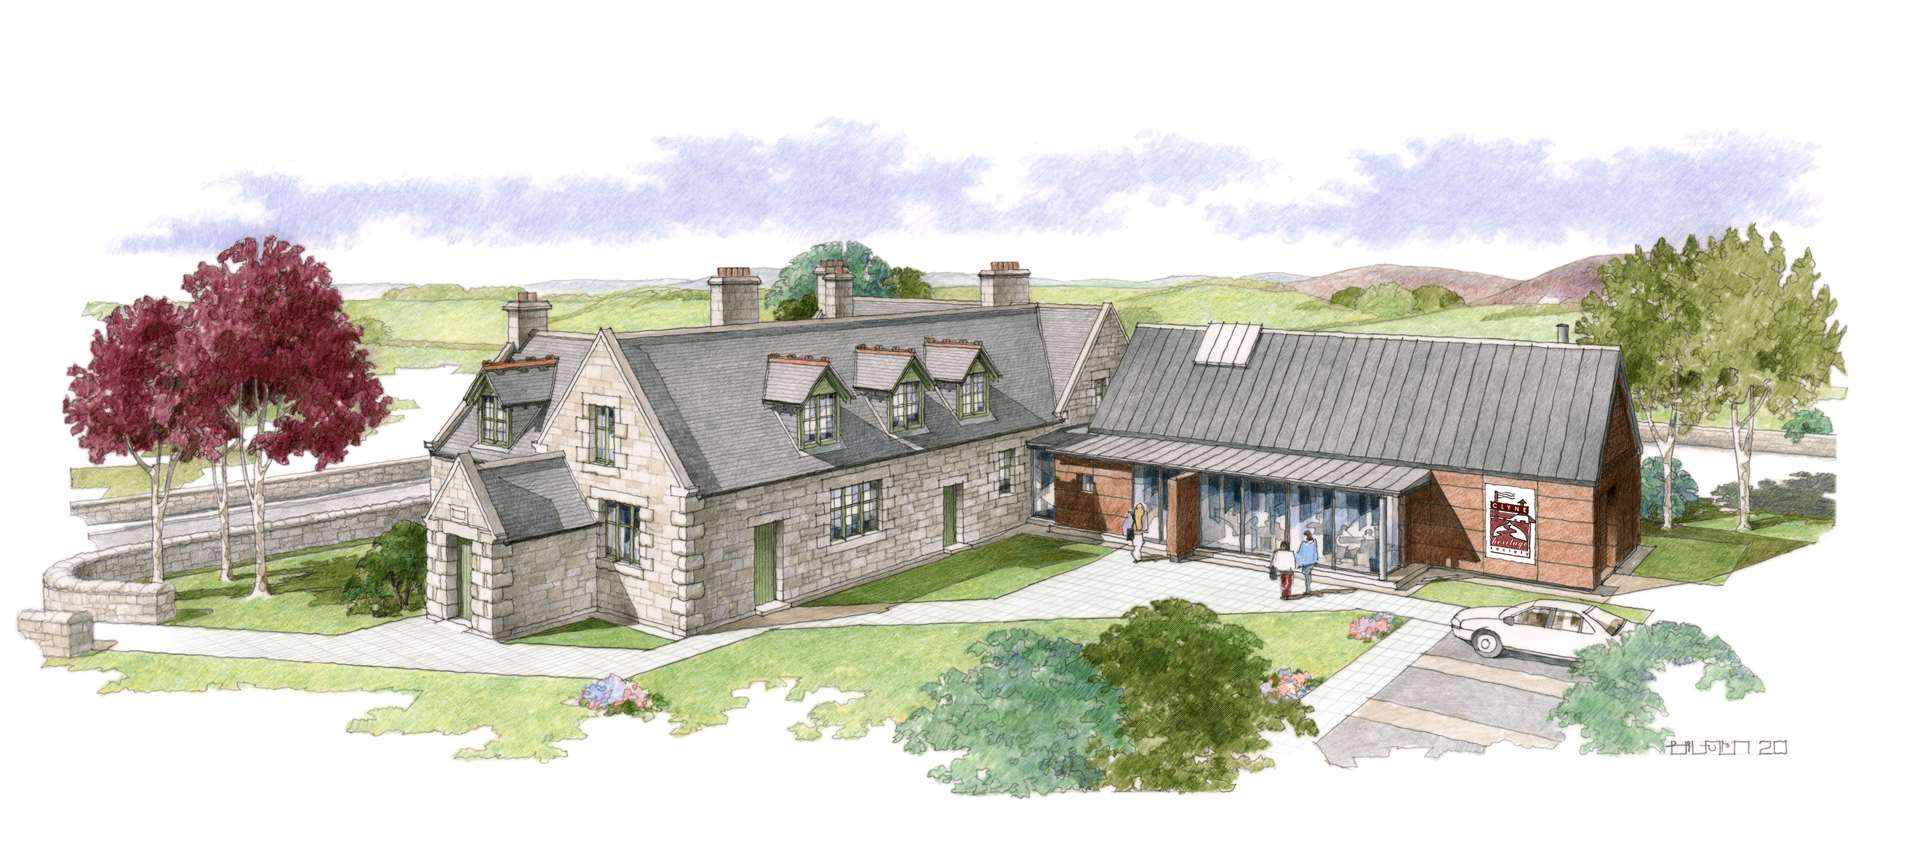 An amended design for the Old Clyne School shows a large extension to house a small café and shop.